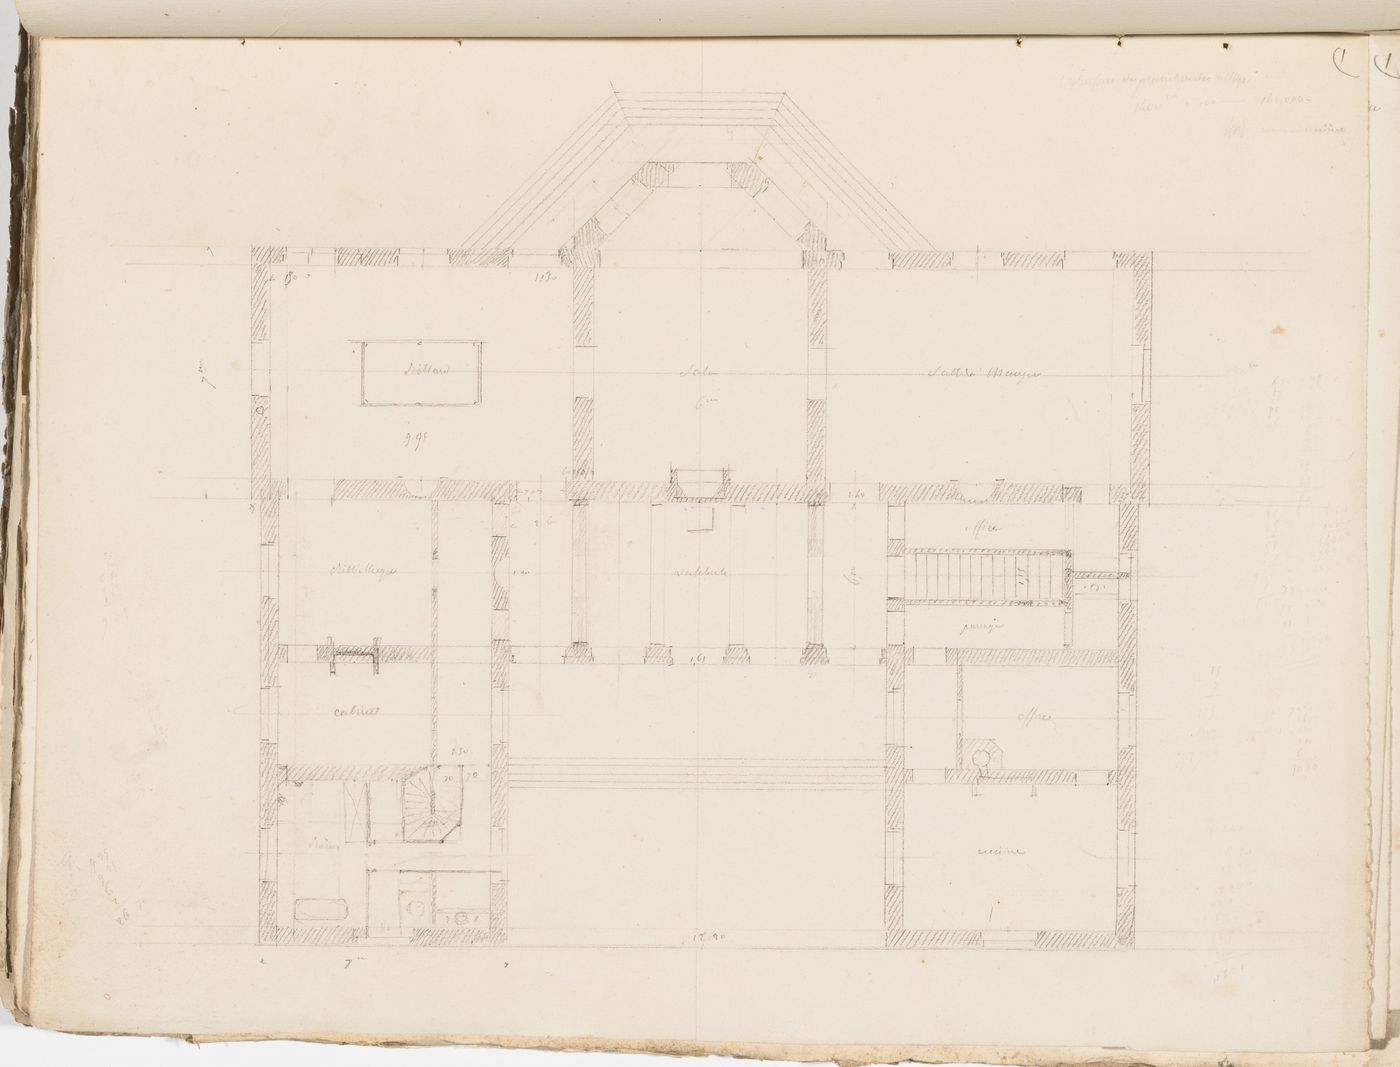 Project no. 1 for a country house for comte Treilhard: Ground floor plan